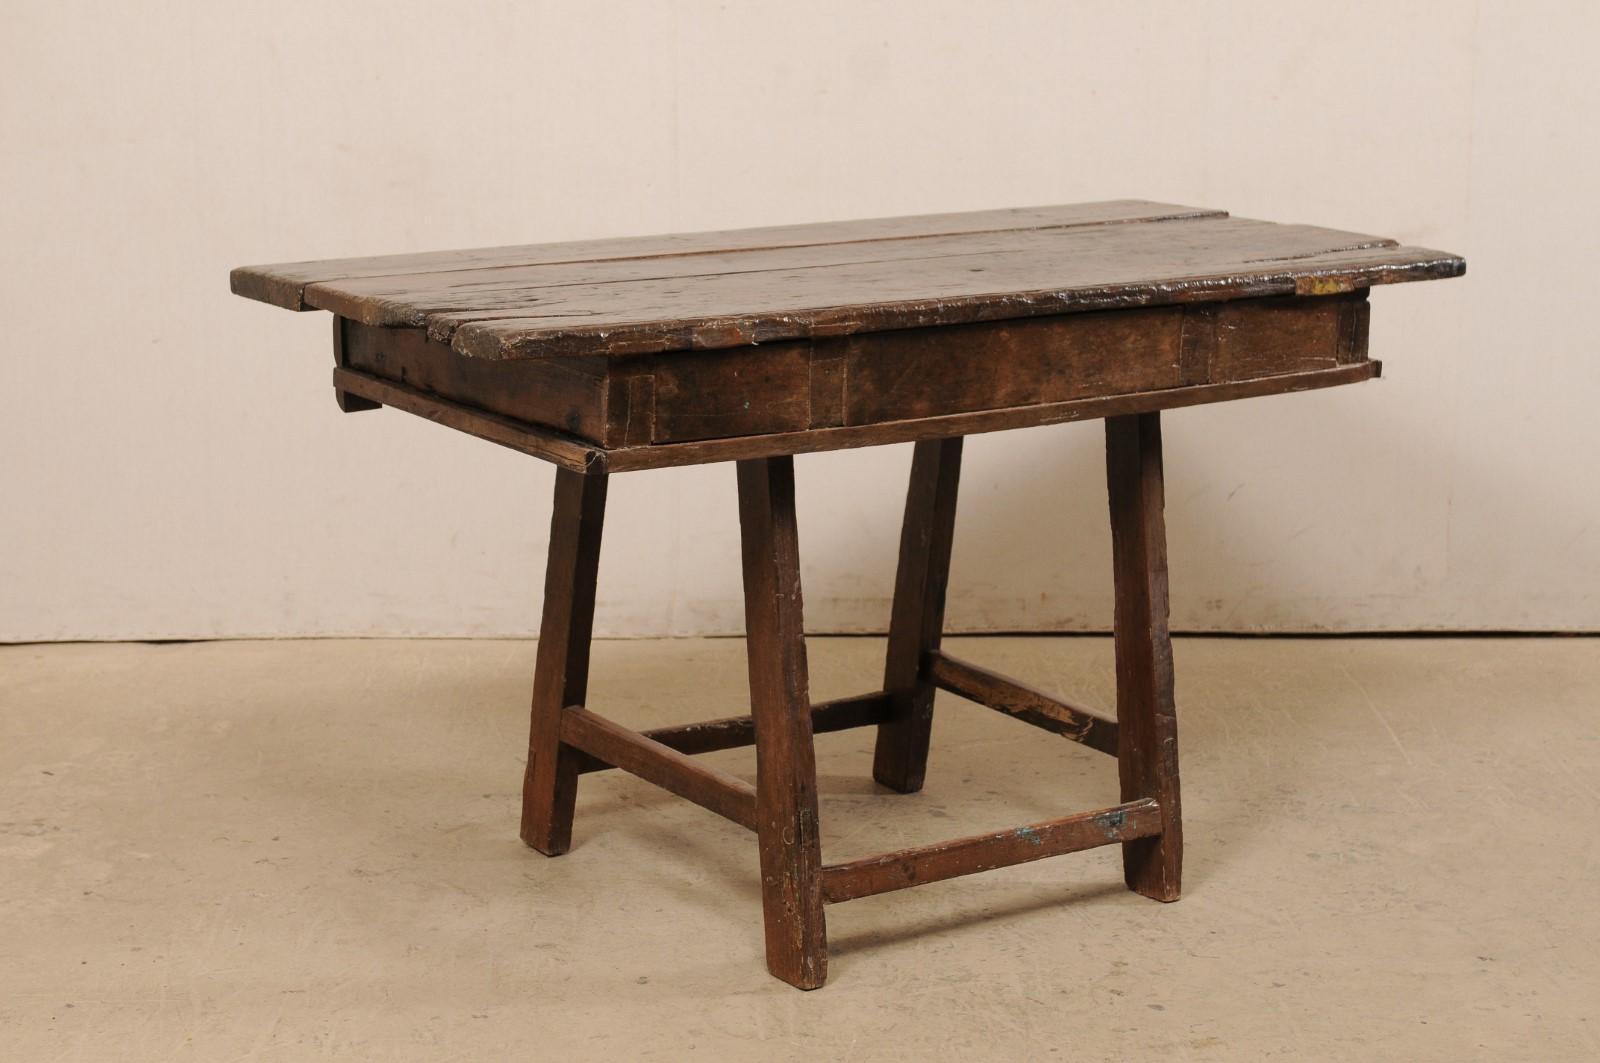 18th C. Brazilian Peroba Wood Table with Drawers, Exquisitely Rustic For Sale 4